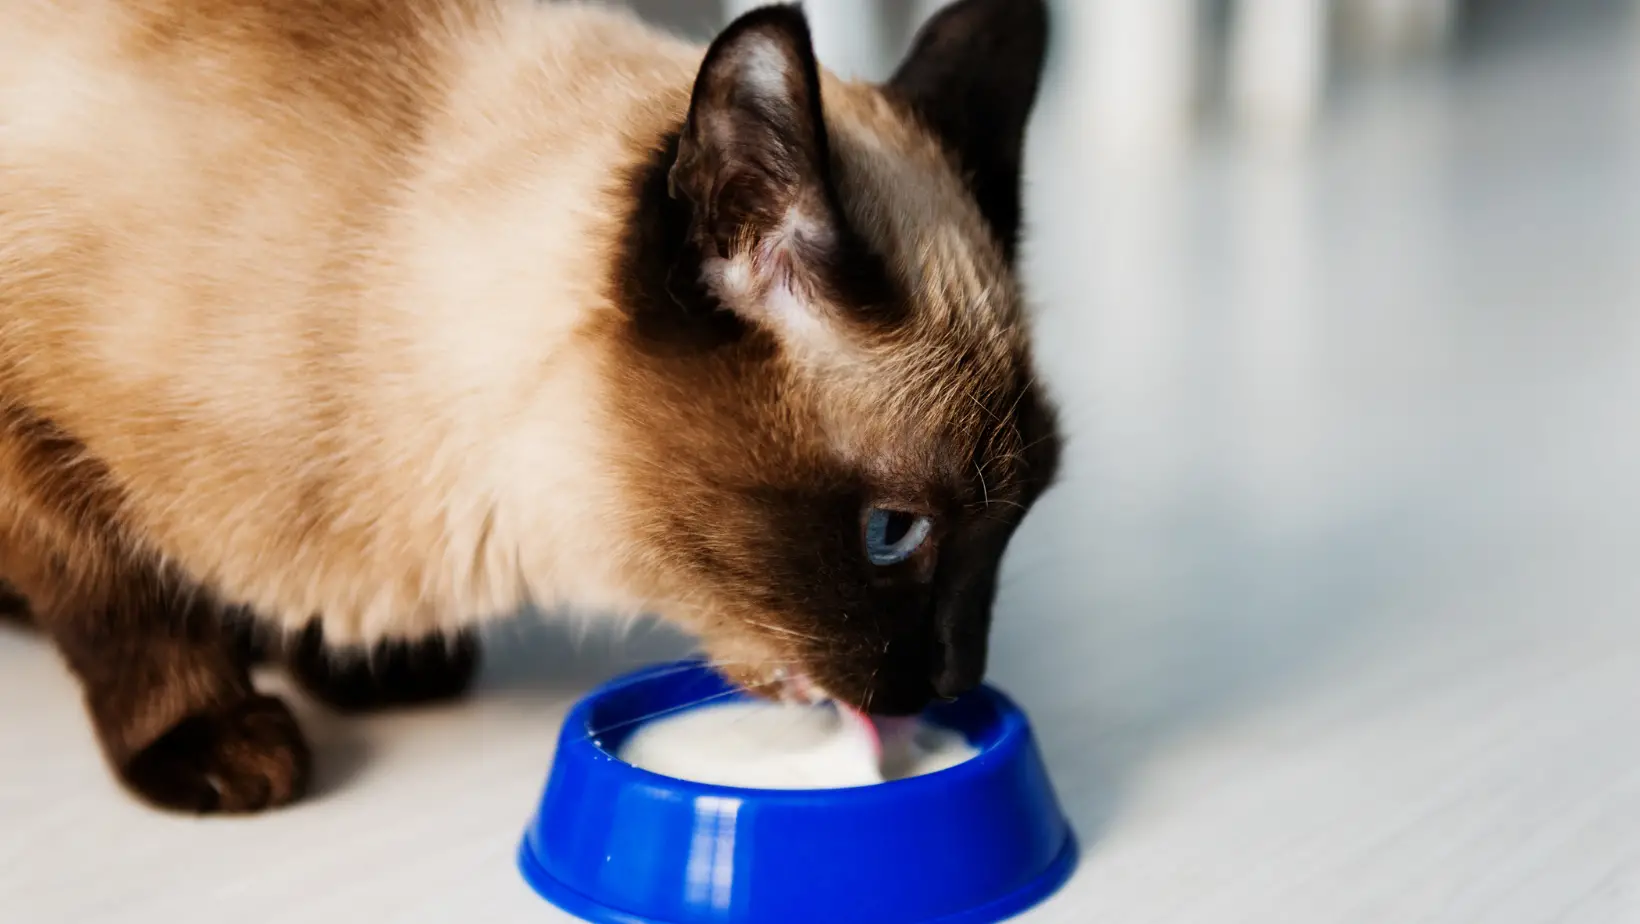 Why is Milk Bad for Cats?